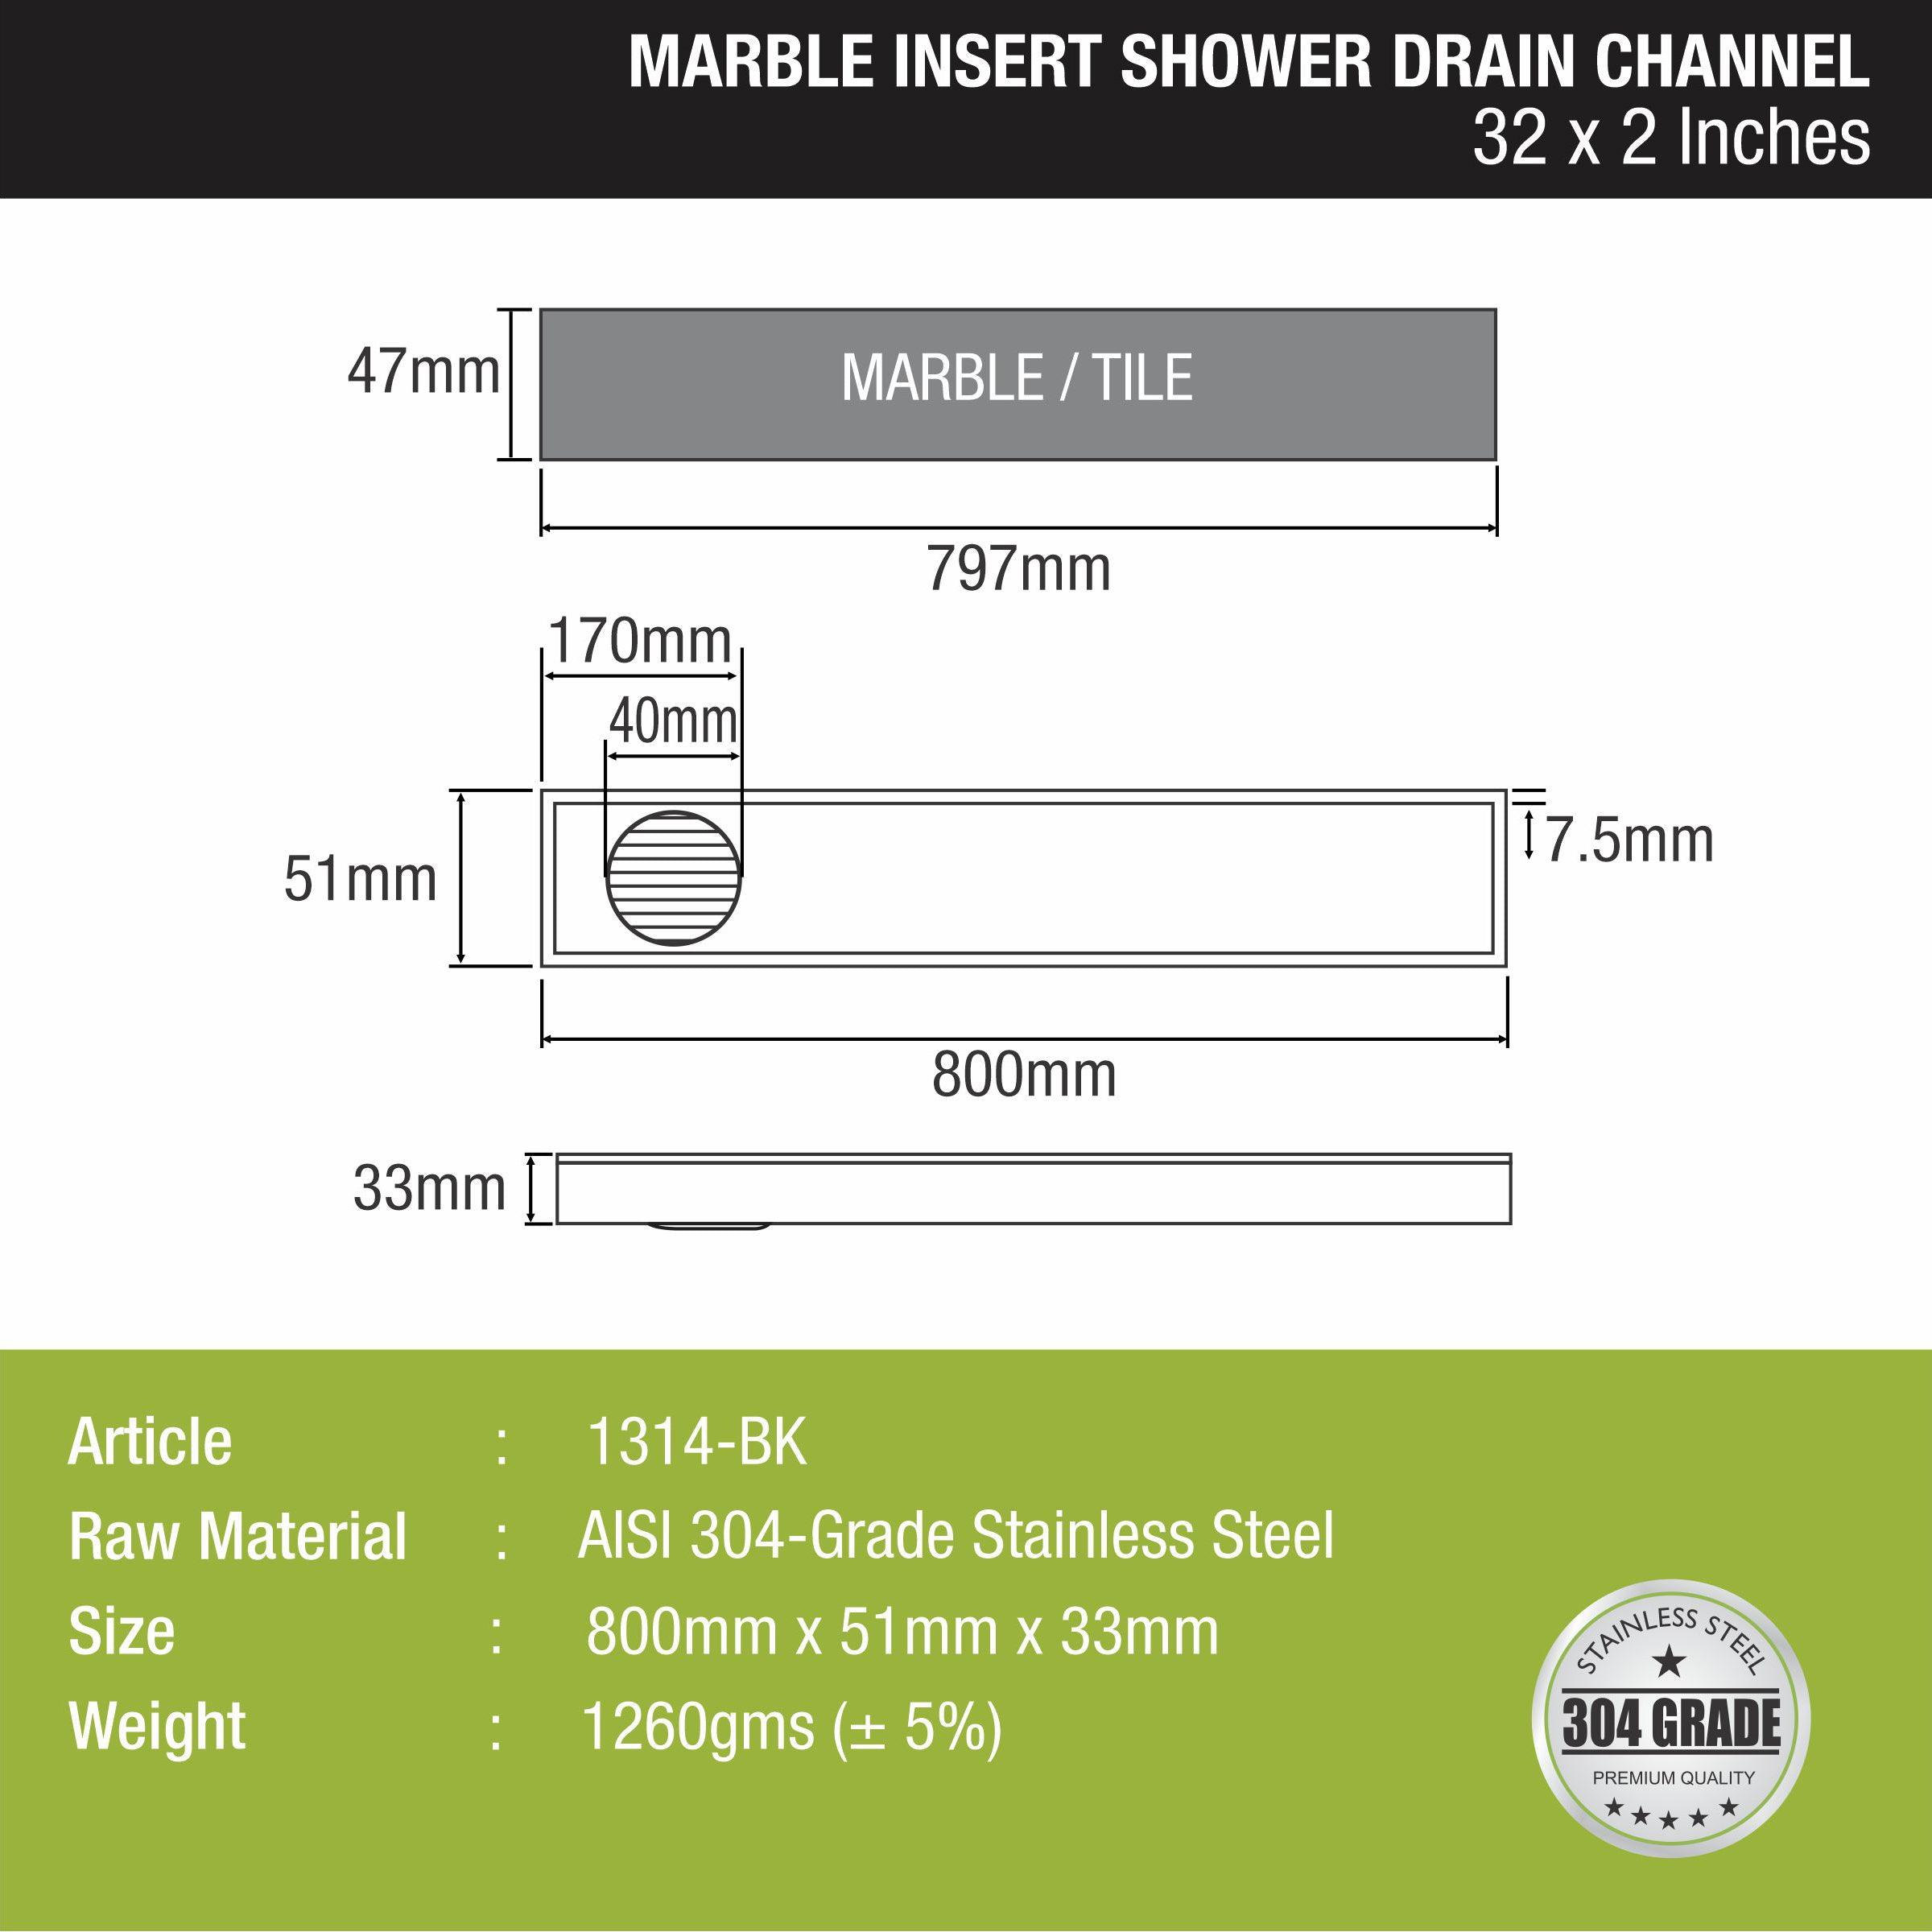 Marble Insert Shower Drain Channel - Black (32 x 2 Inches) size and measurement